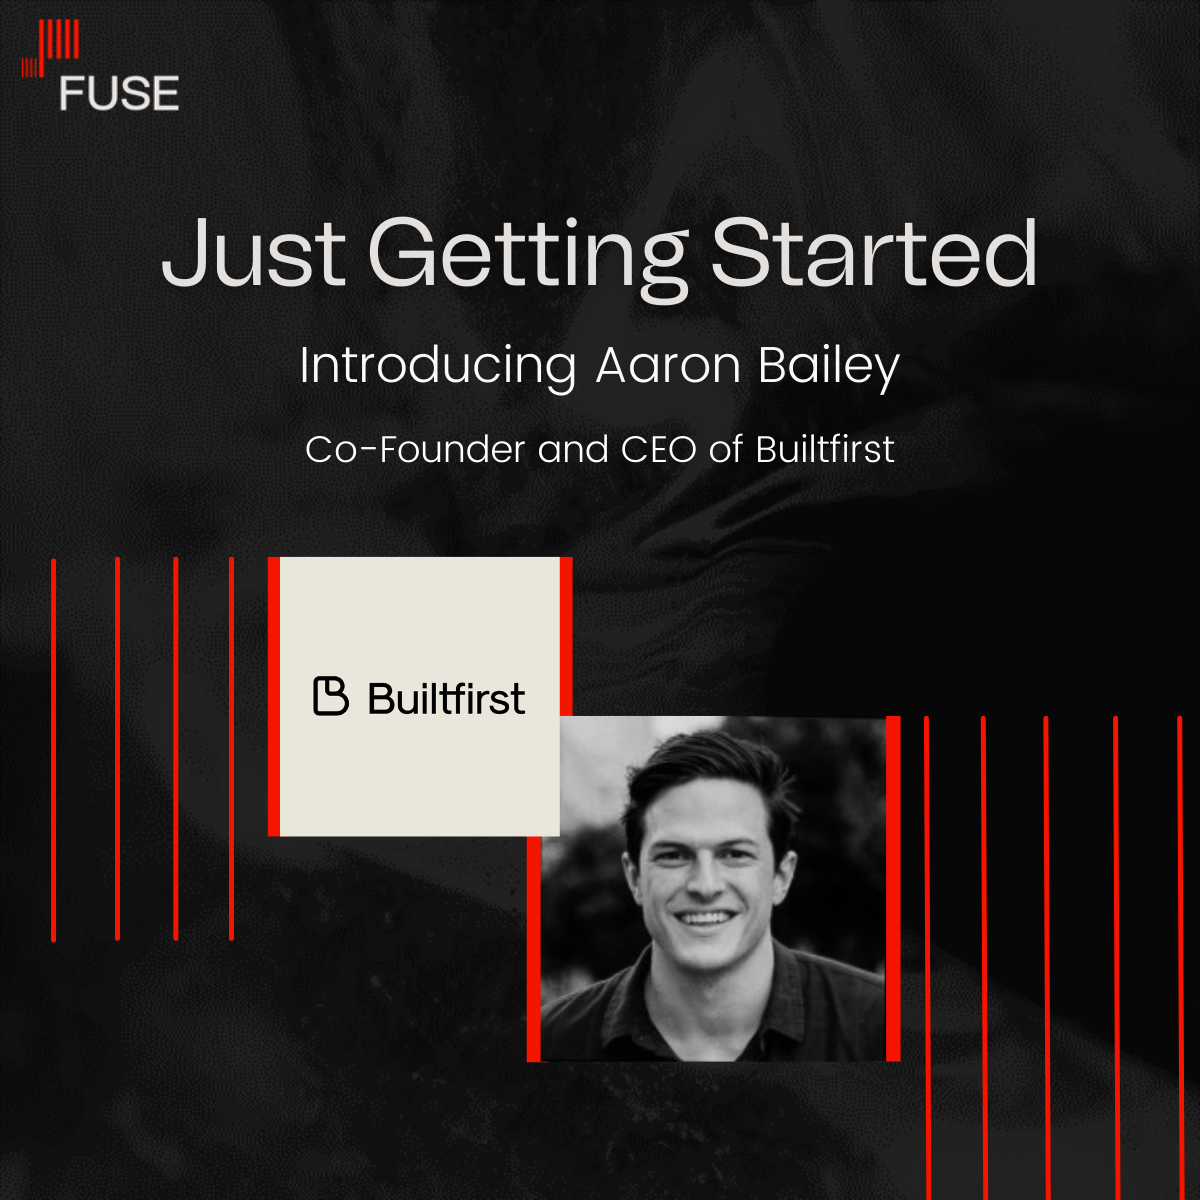 Just Getting Started with Aaron Bailey, Co-Founder and CEO of Builtfirst